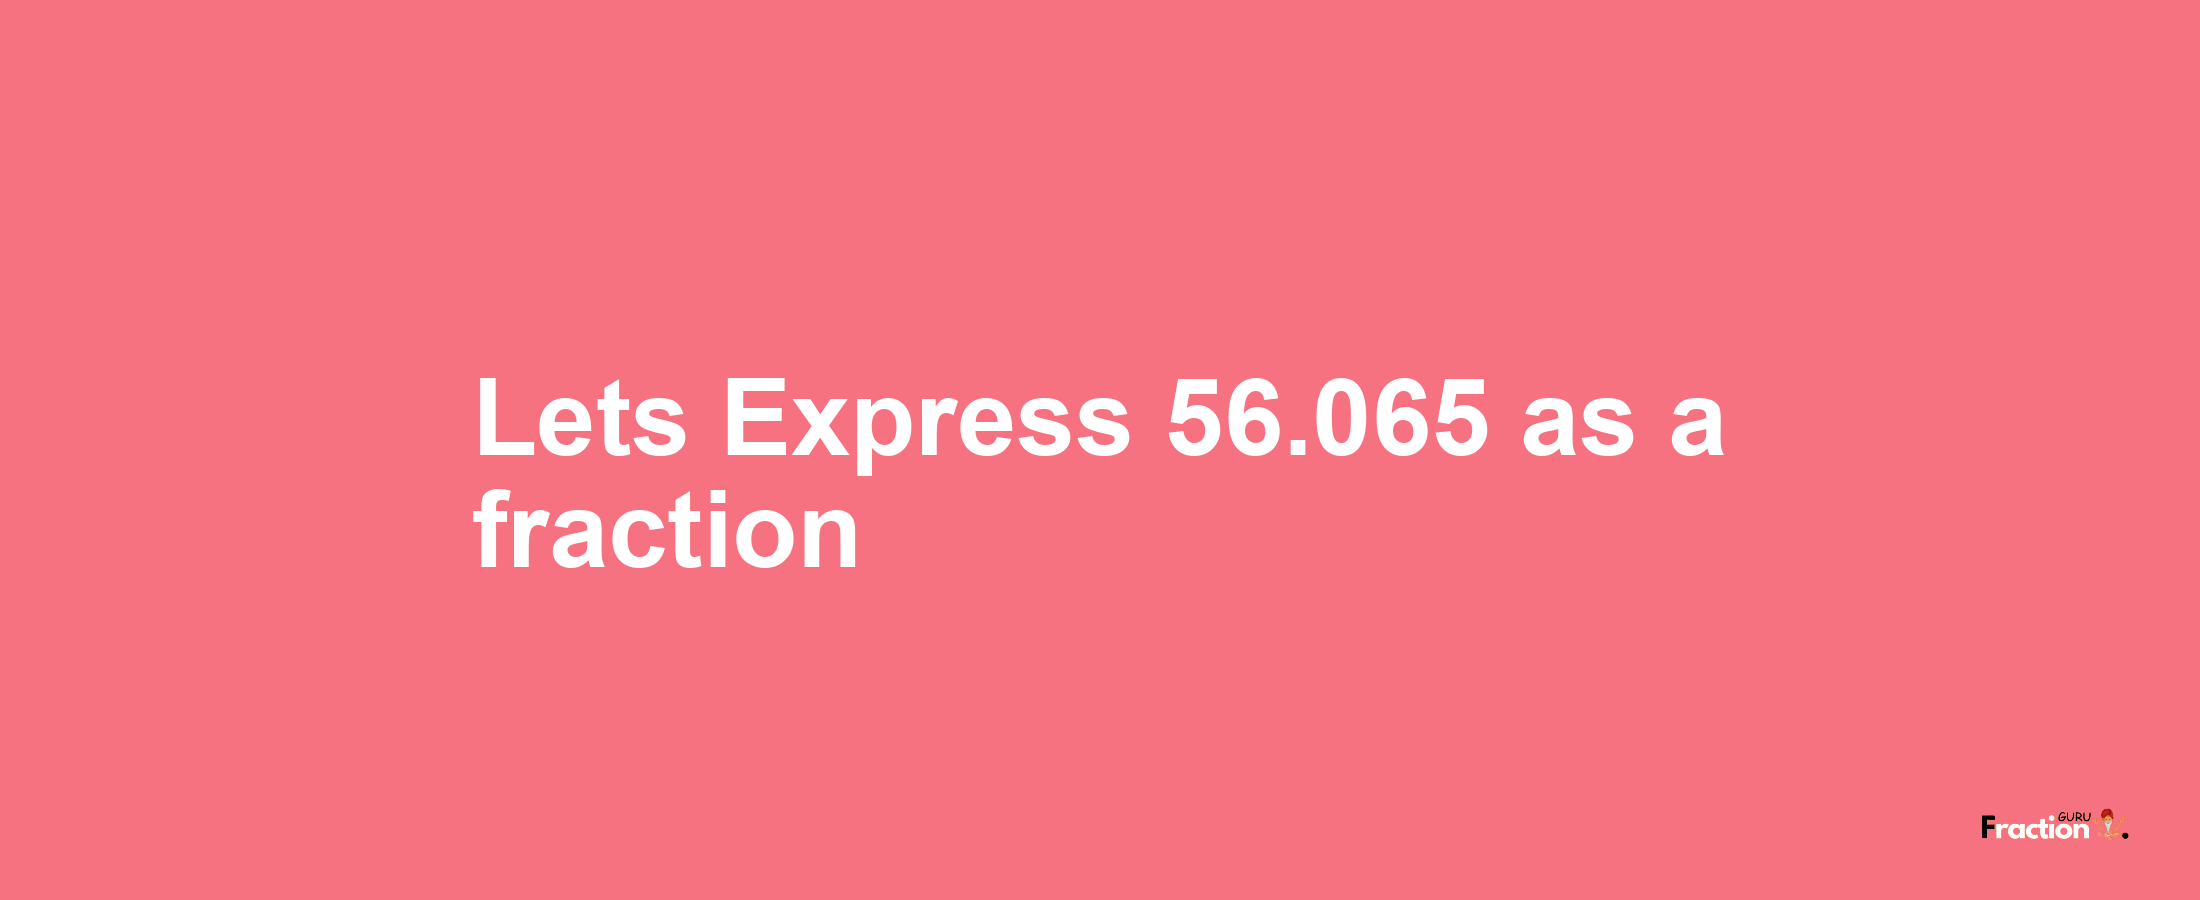 Lets Express 56.065 as afraction